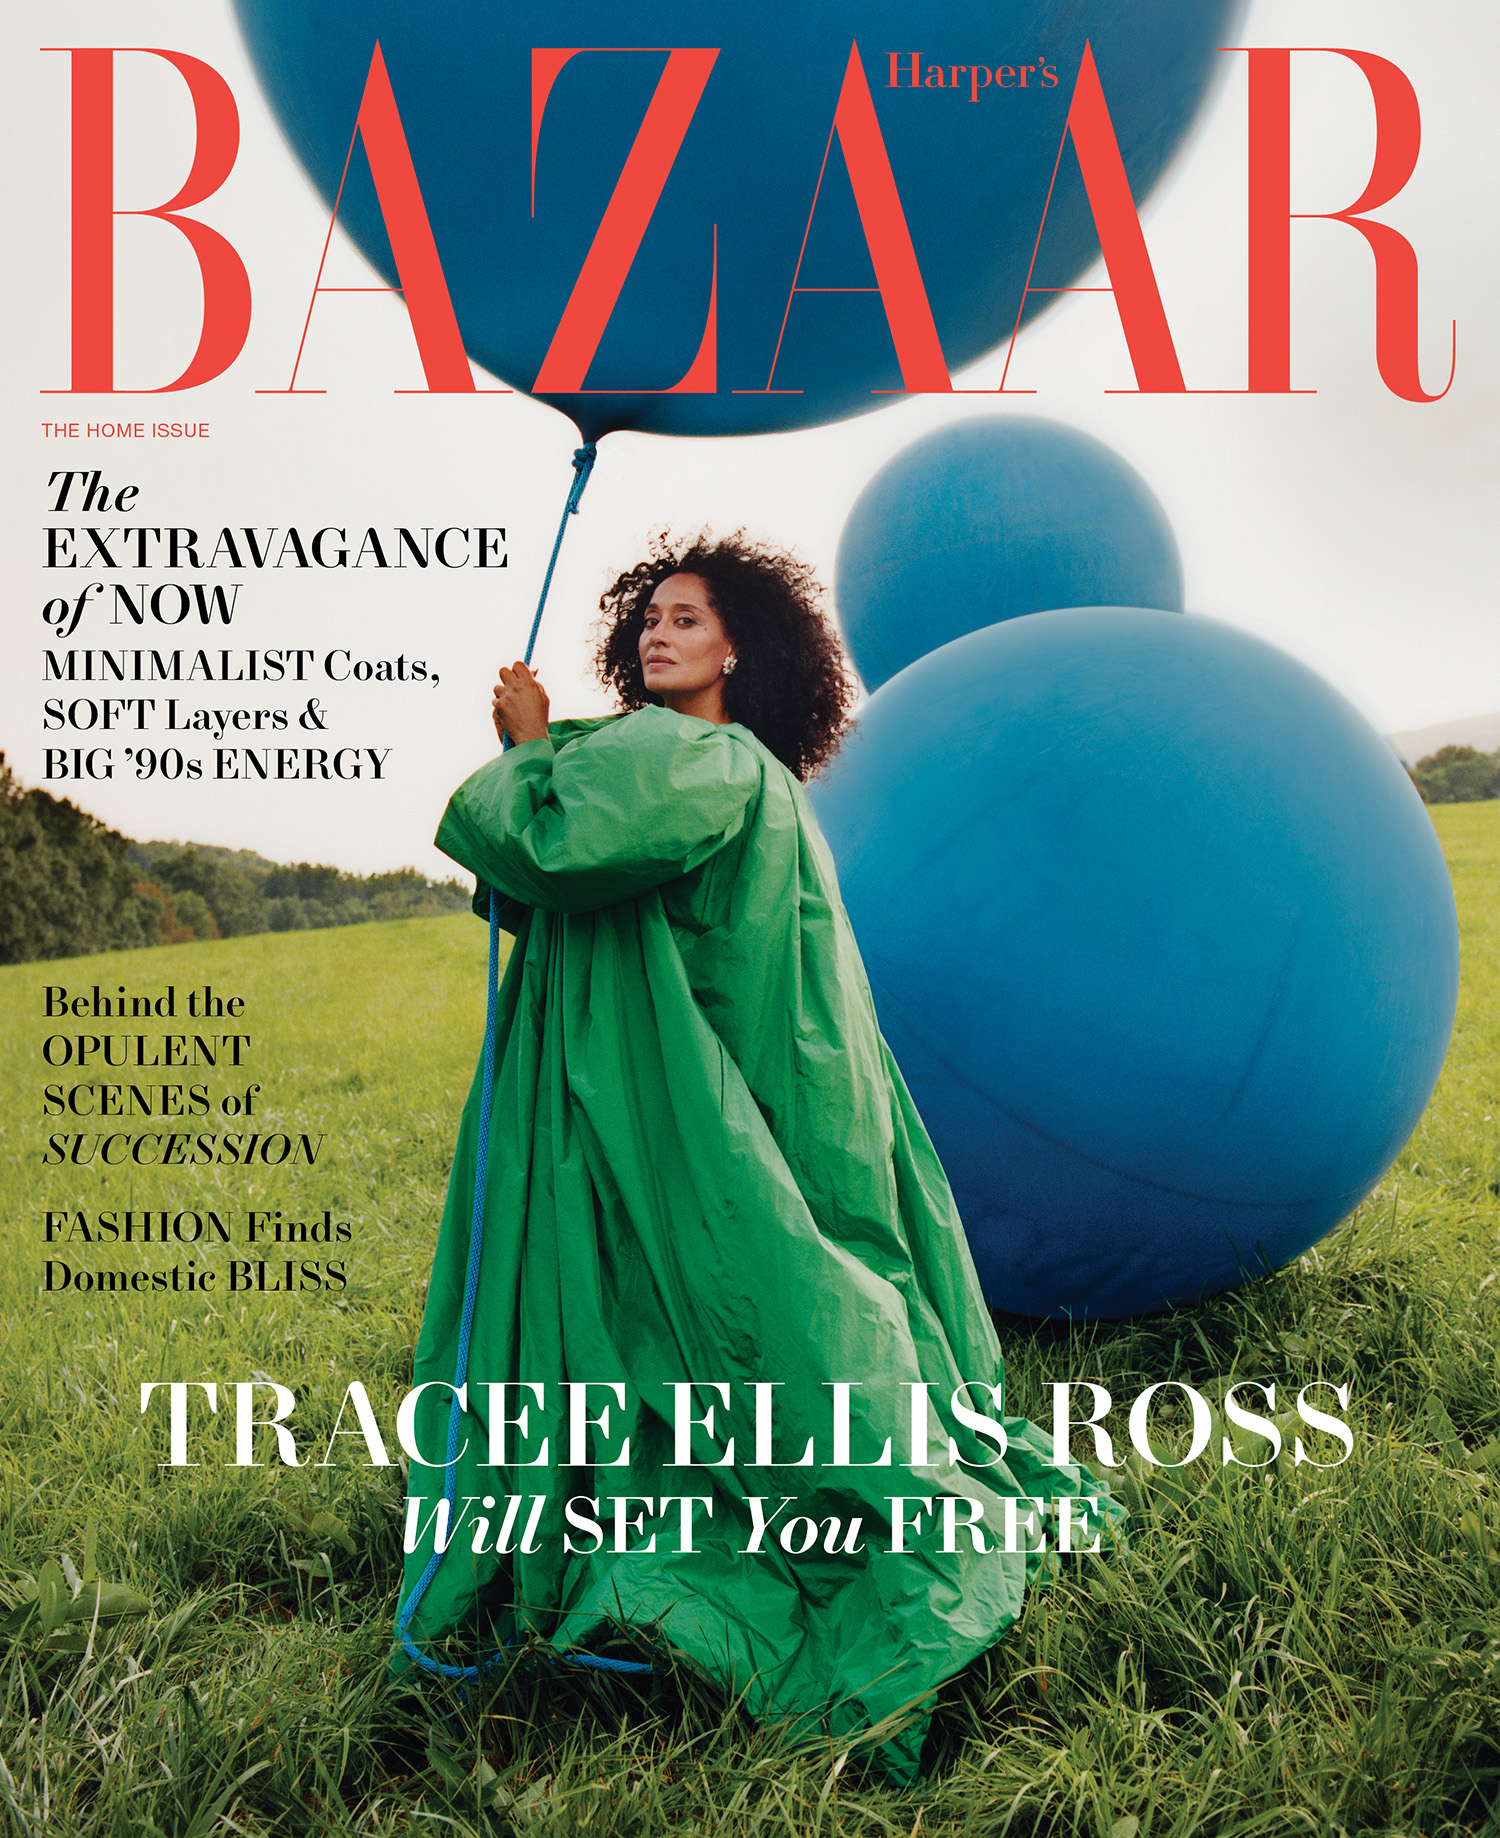 Tracee Ellis Ross covers Harper’s Bazaar US November 2021 by Renell Medrano